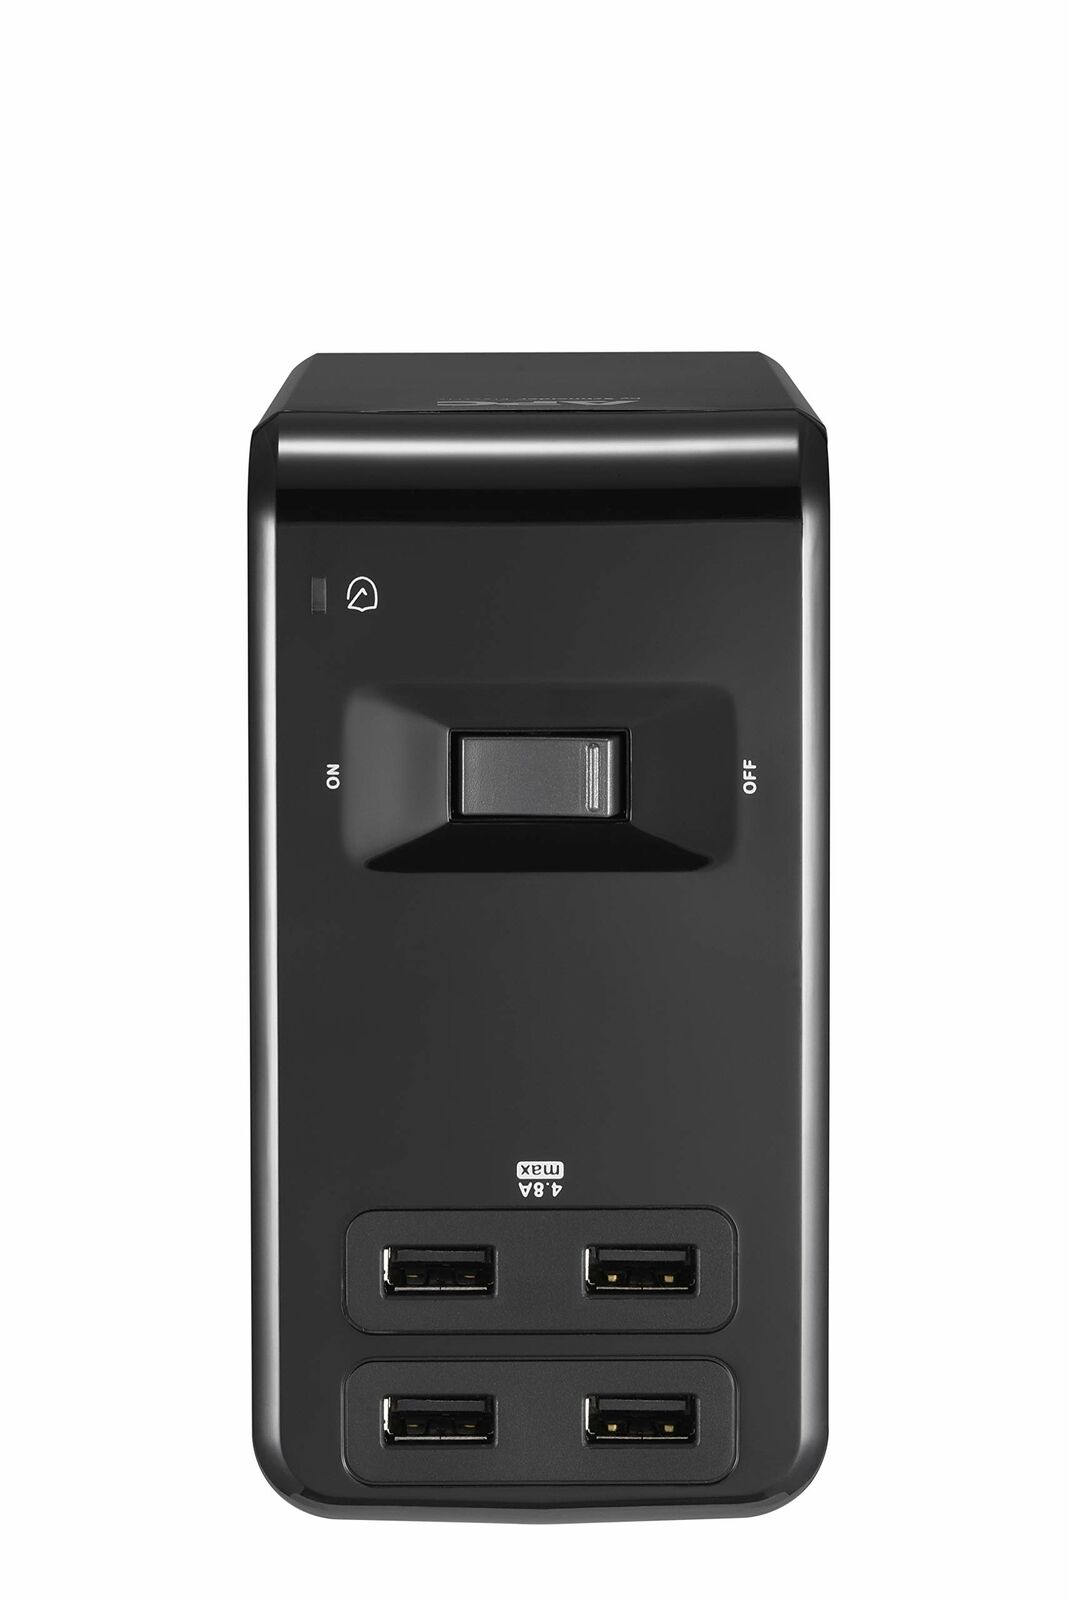 APC PE6U4 Essential SurgeArrest Desk-Mount Power Station with 6 Outlets and 4 USB Charging Ports (Black) - image 2 of 7